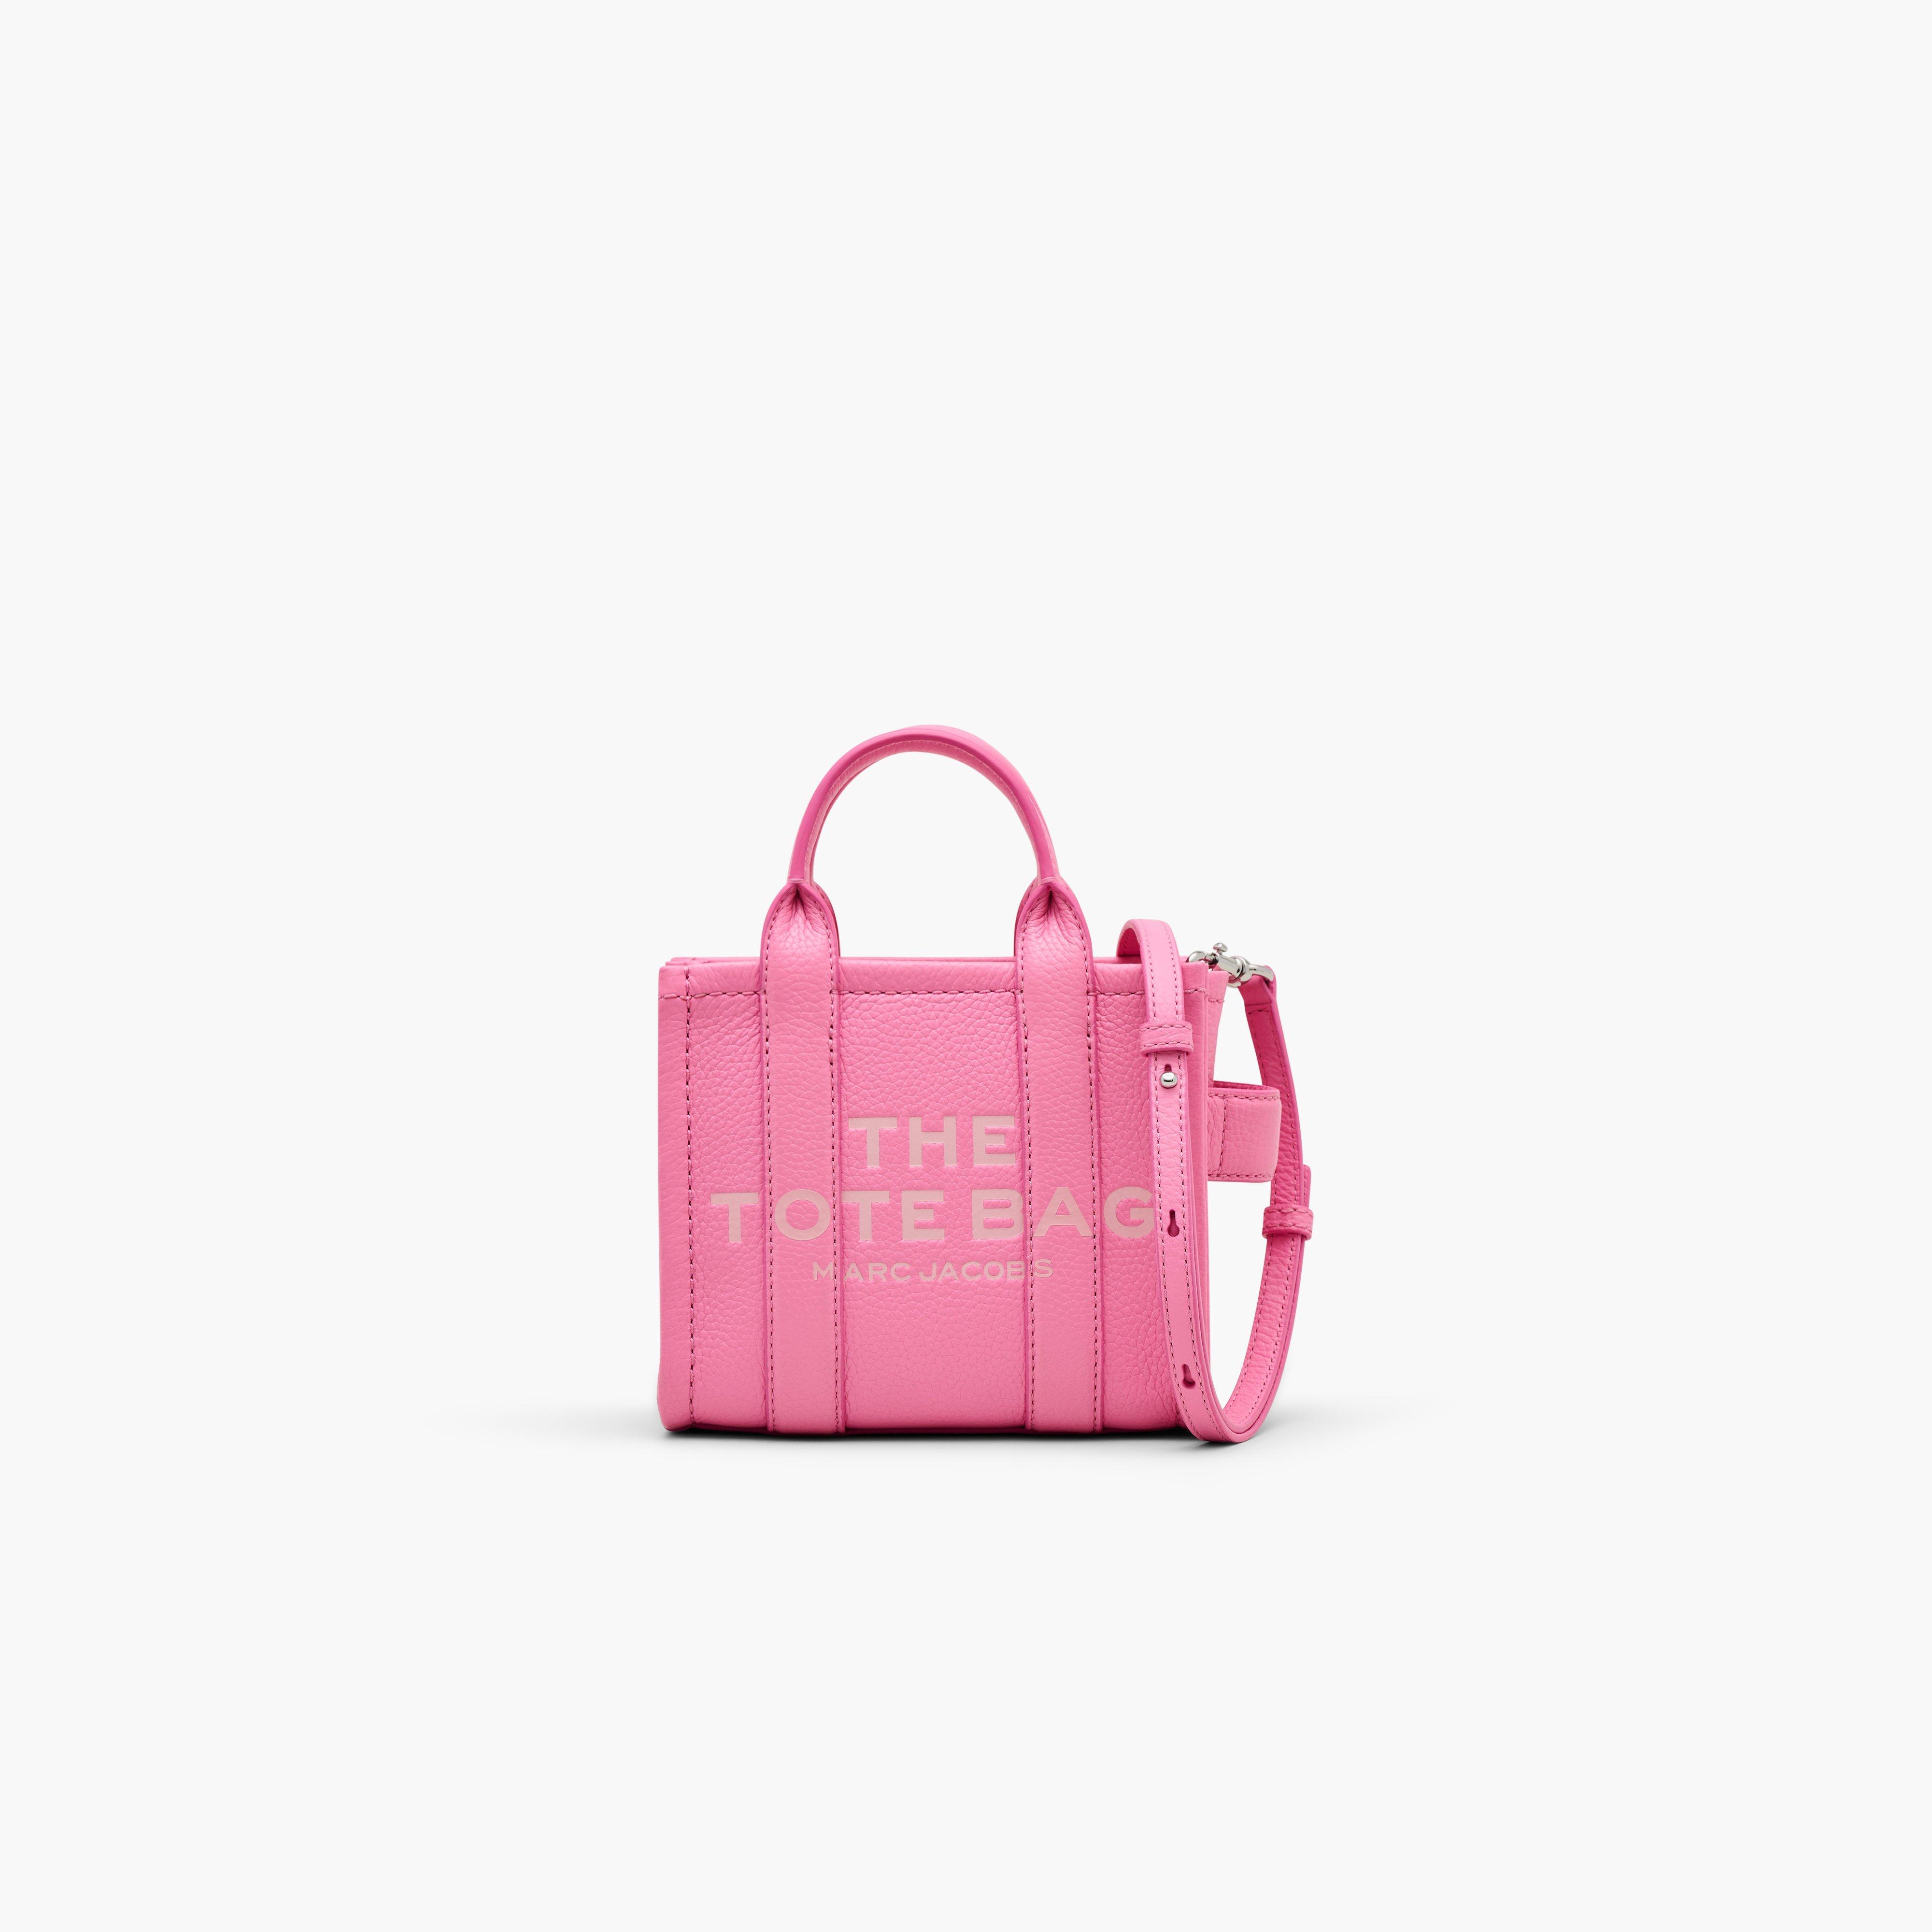 Marc by Marc jacobs The Leather Mini Tote Bag,PETAL PINK